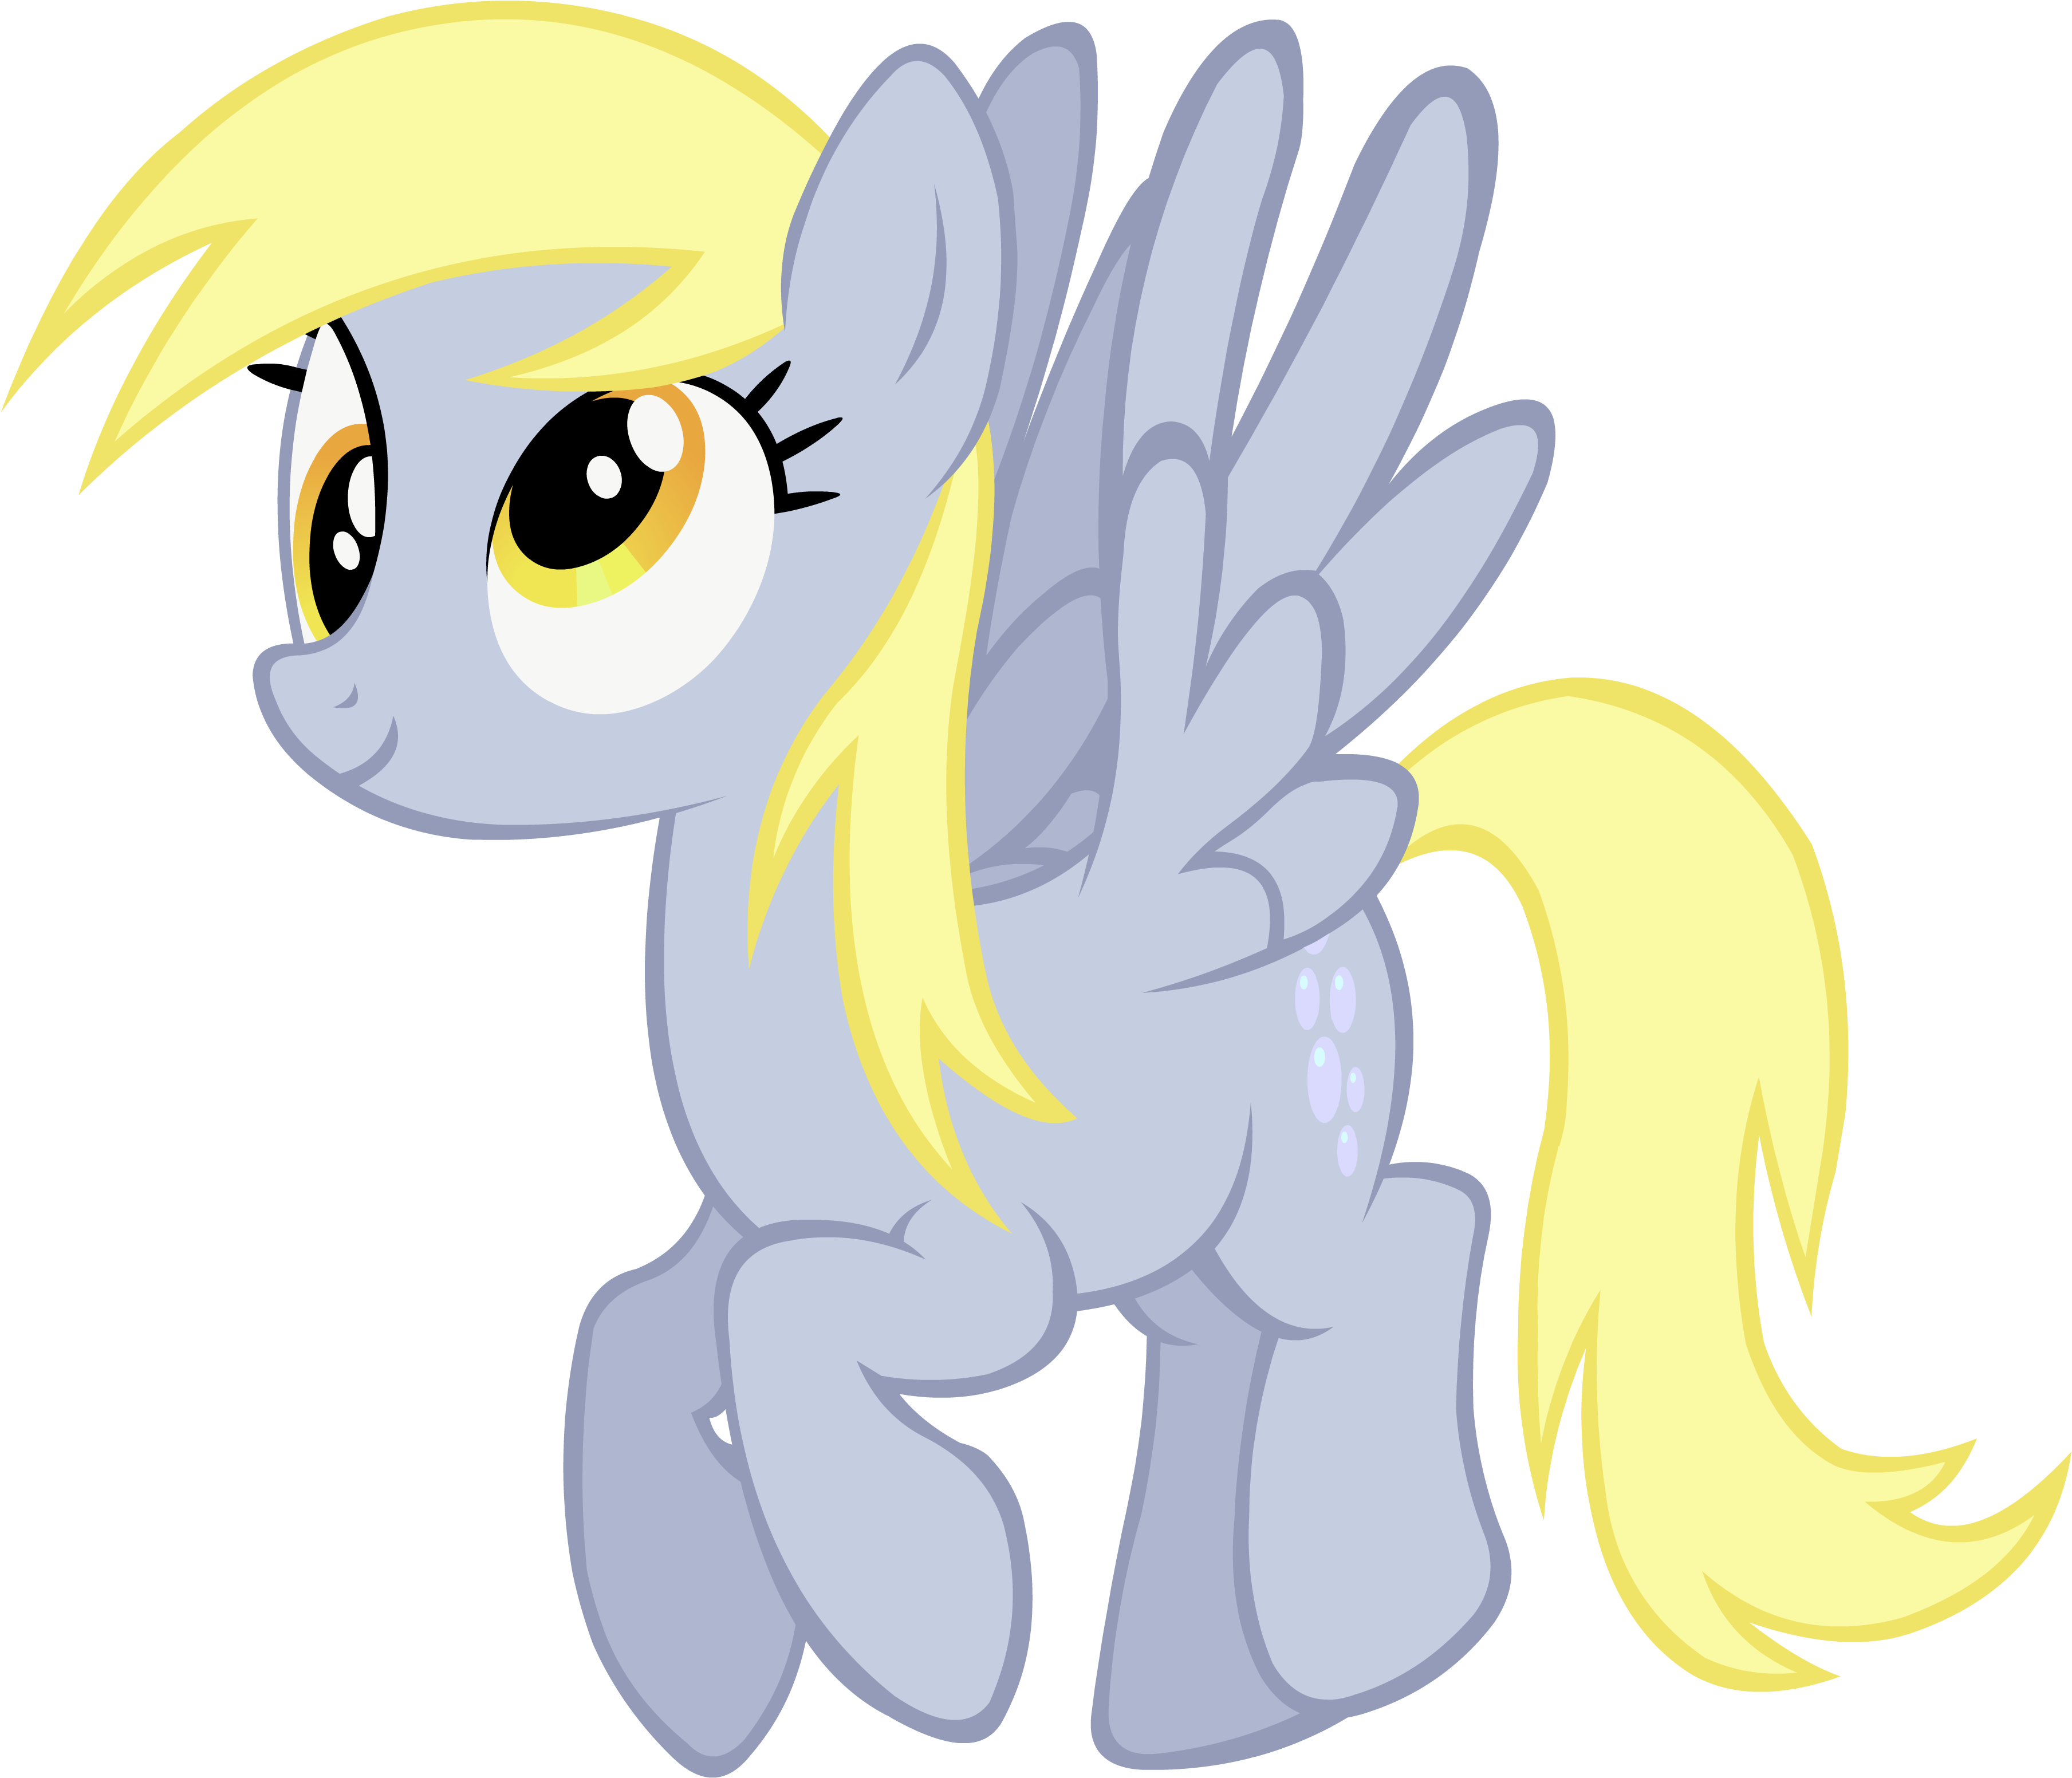 derpy_by_doctor_g-d54mzib.png